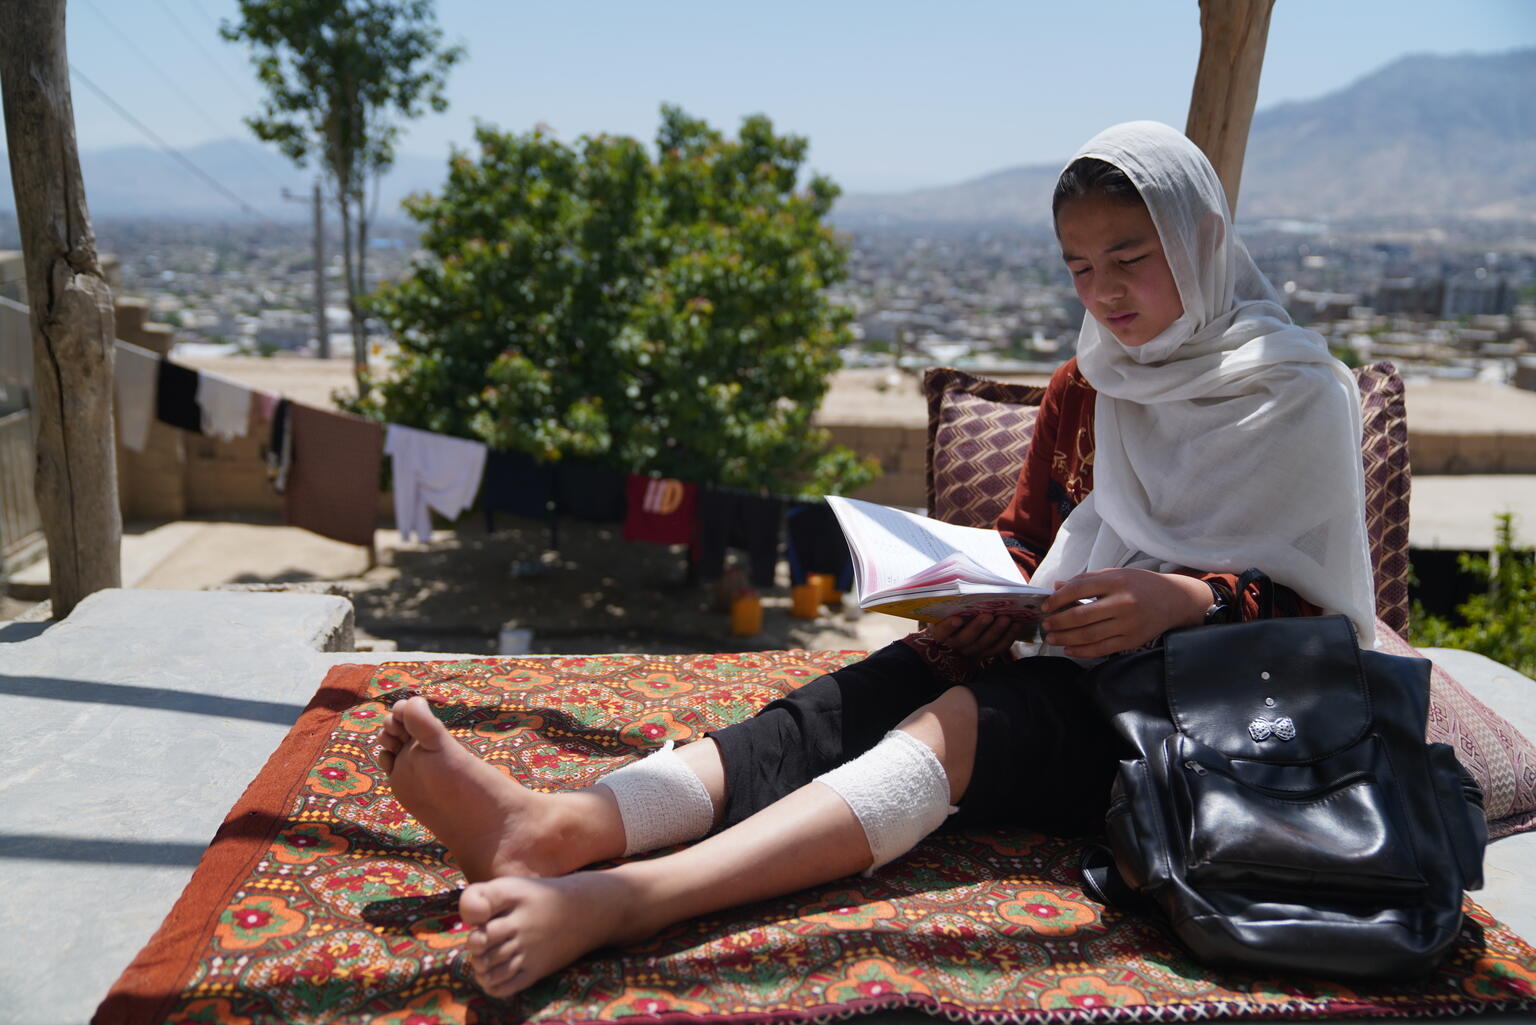 A young girl reads after her school was attacked in Afghanistan, injurying both her legs.